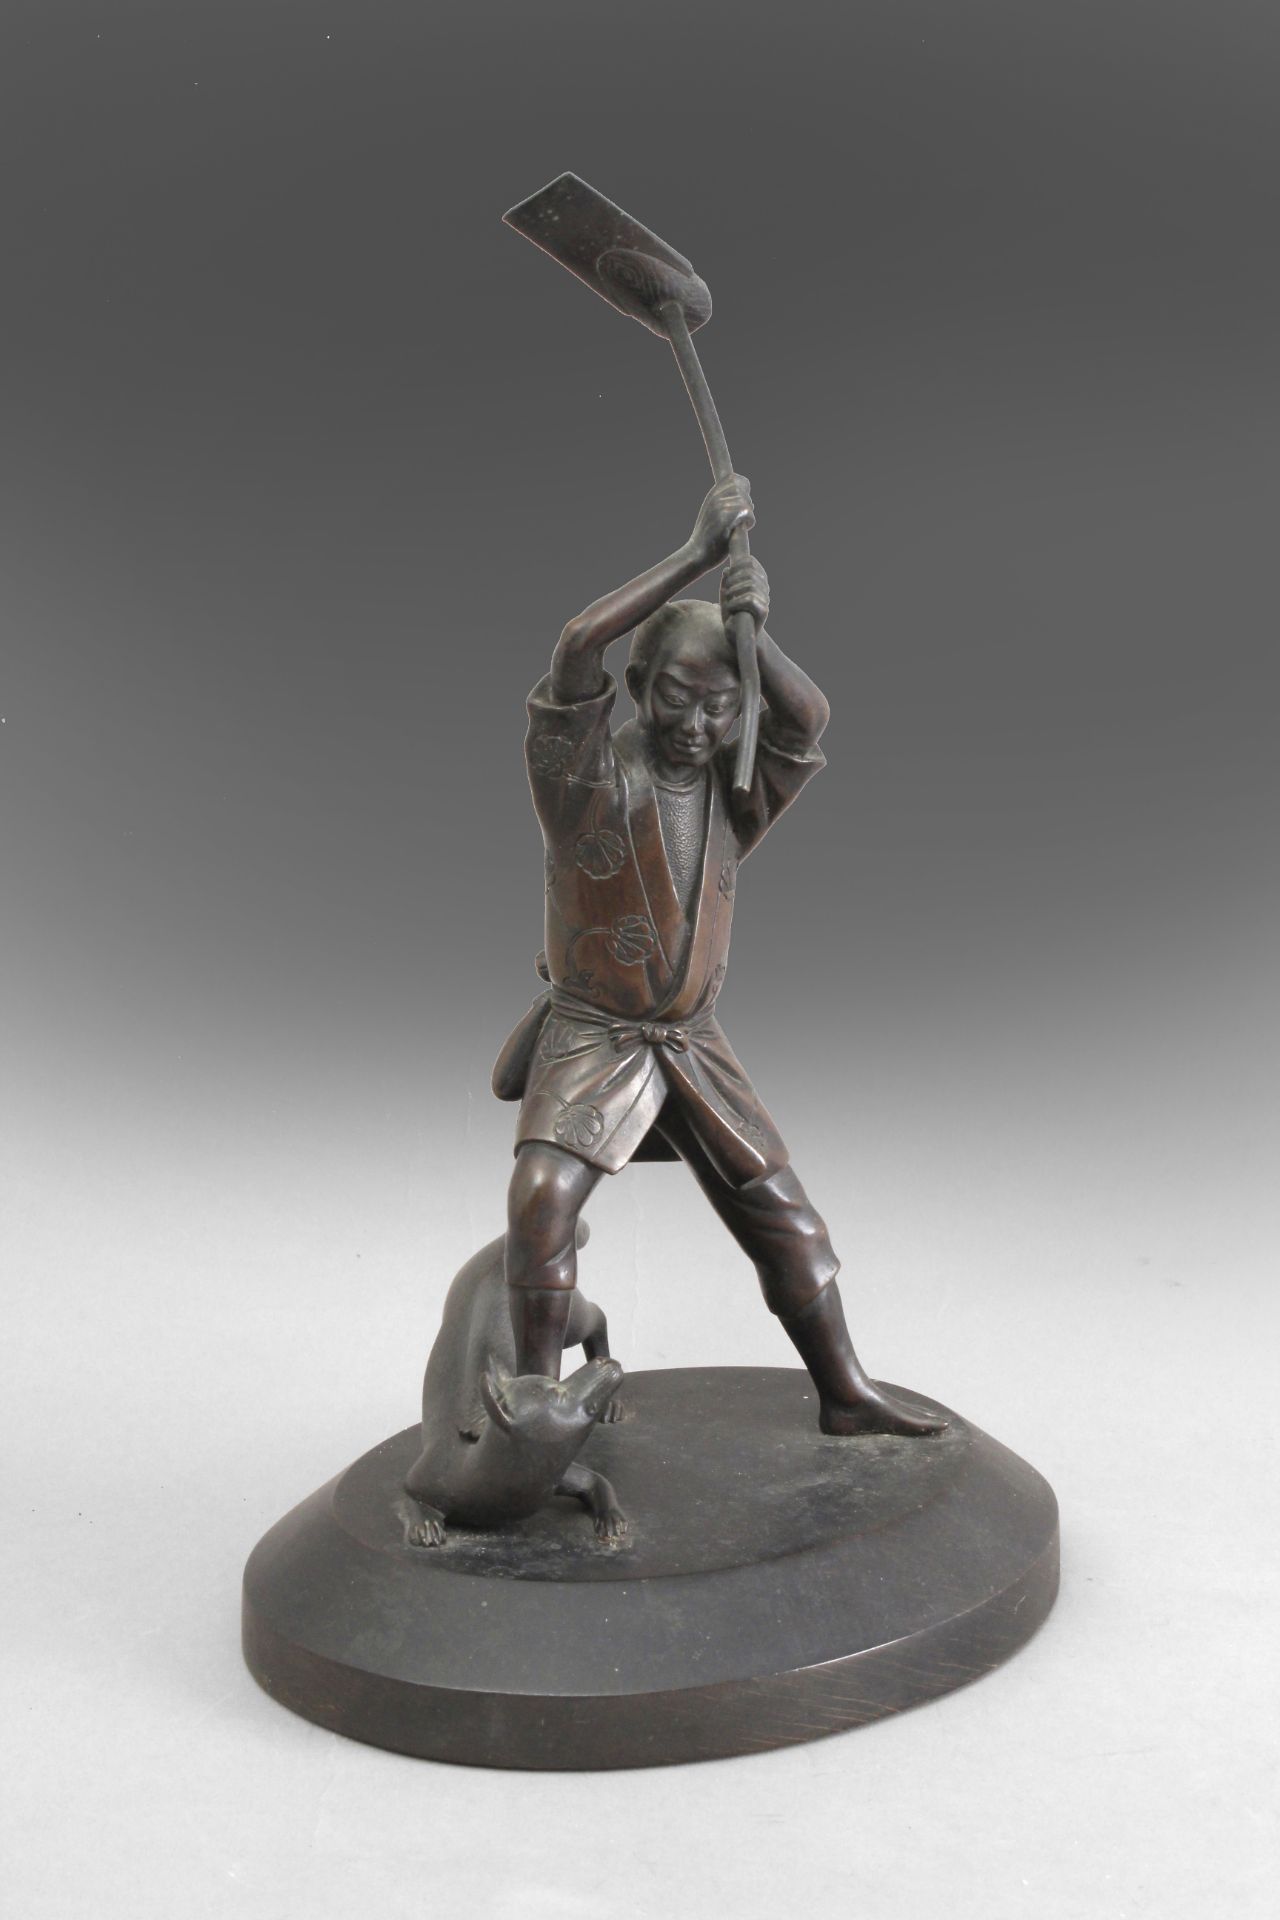 19th century Japanese school. A bronze sculpture of a peasant from Meiji period